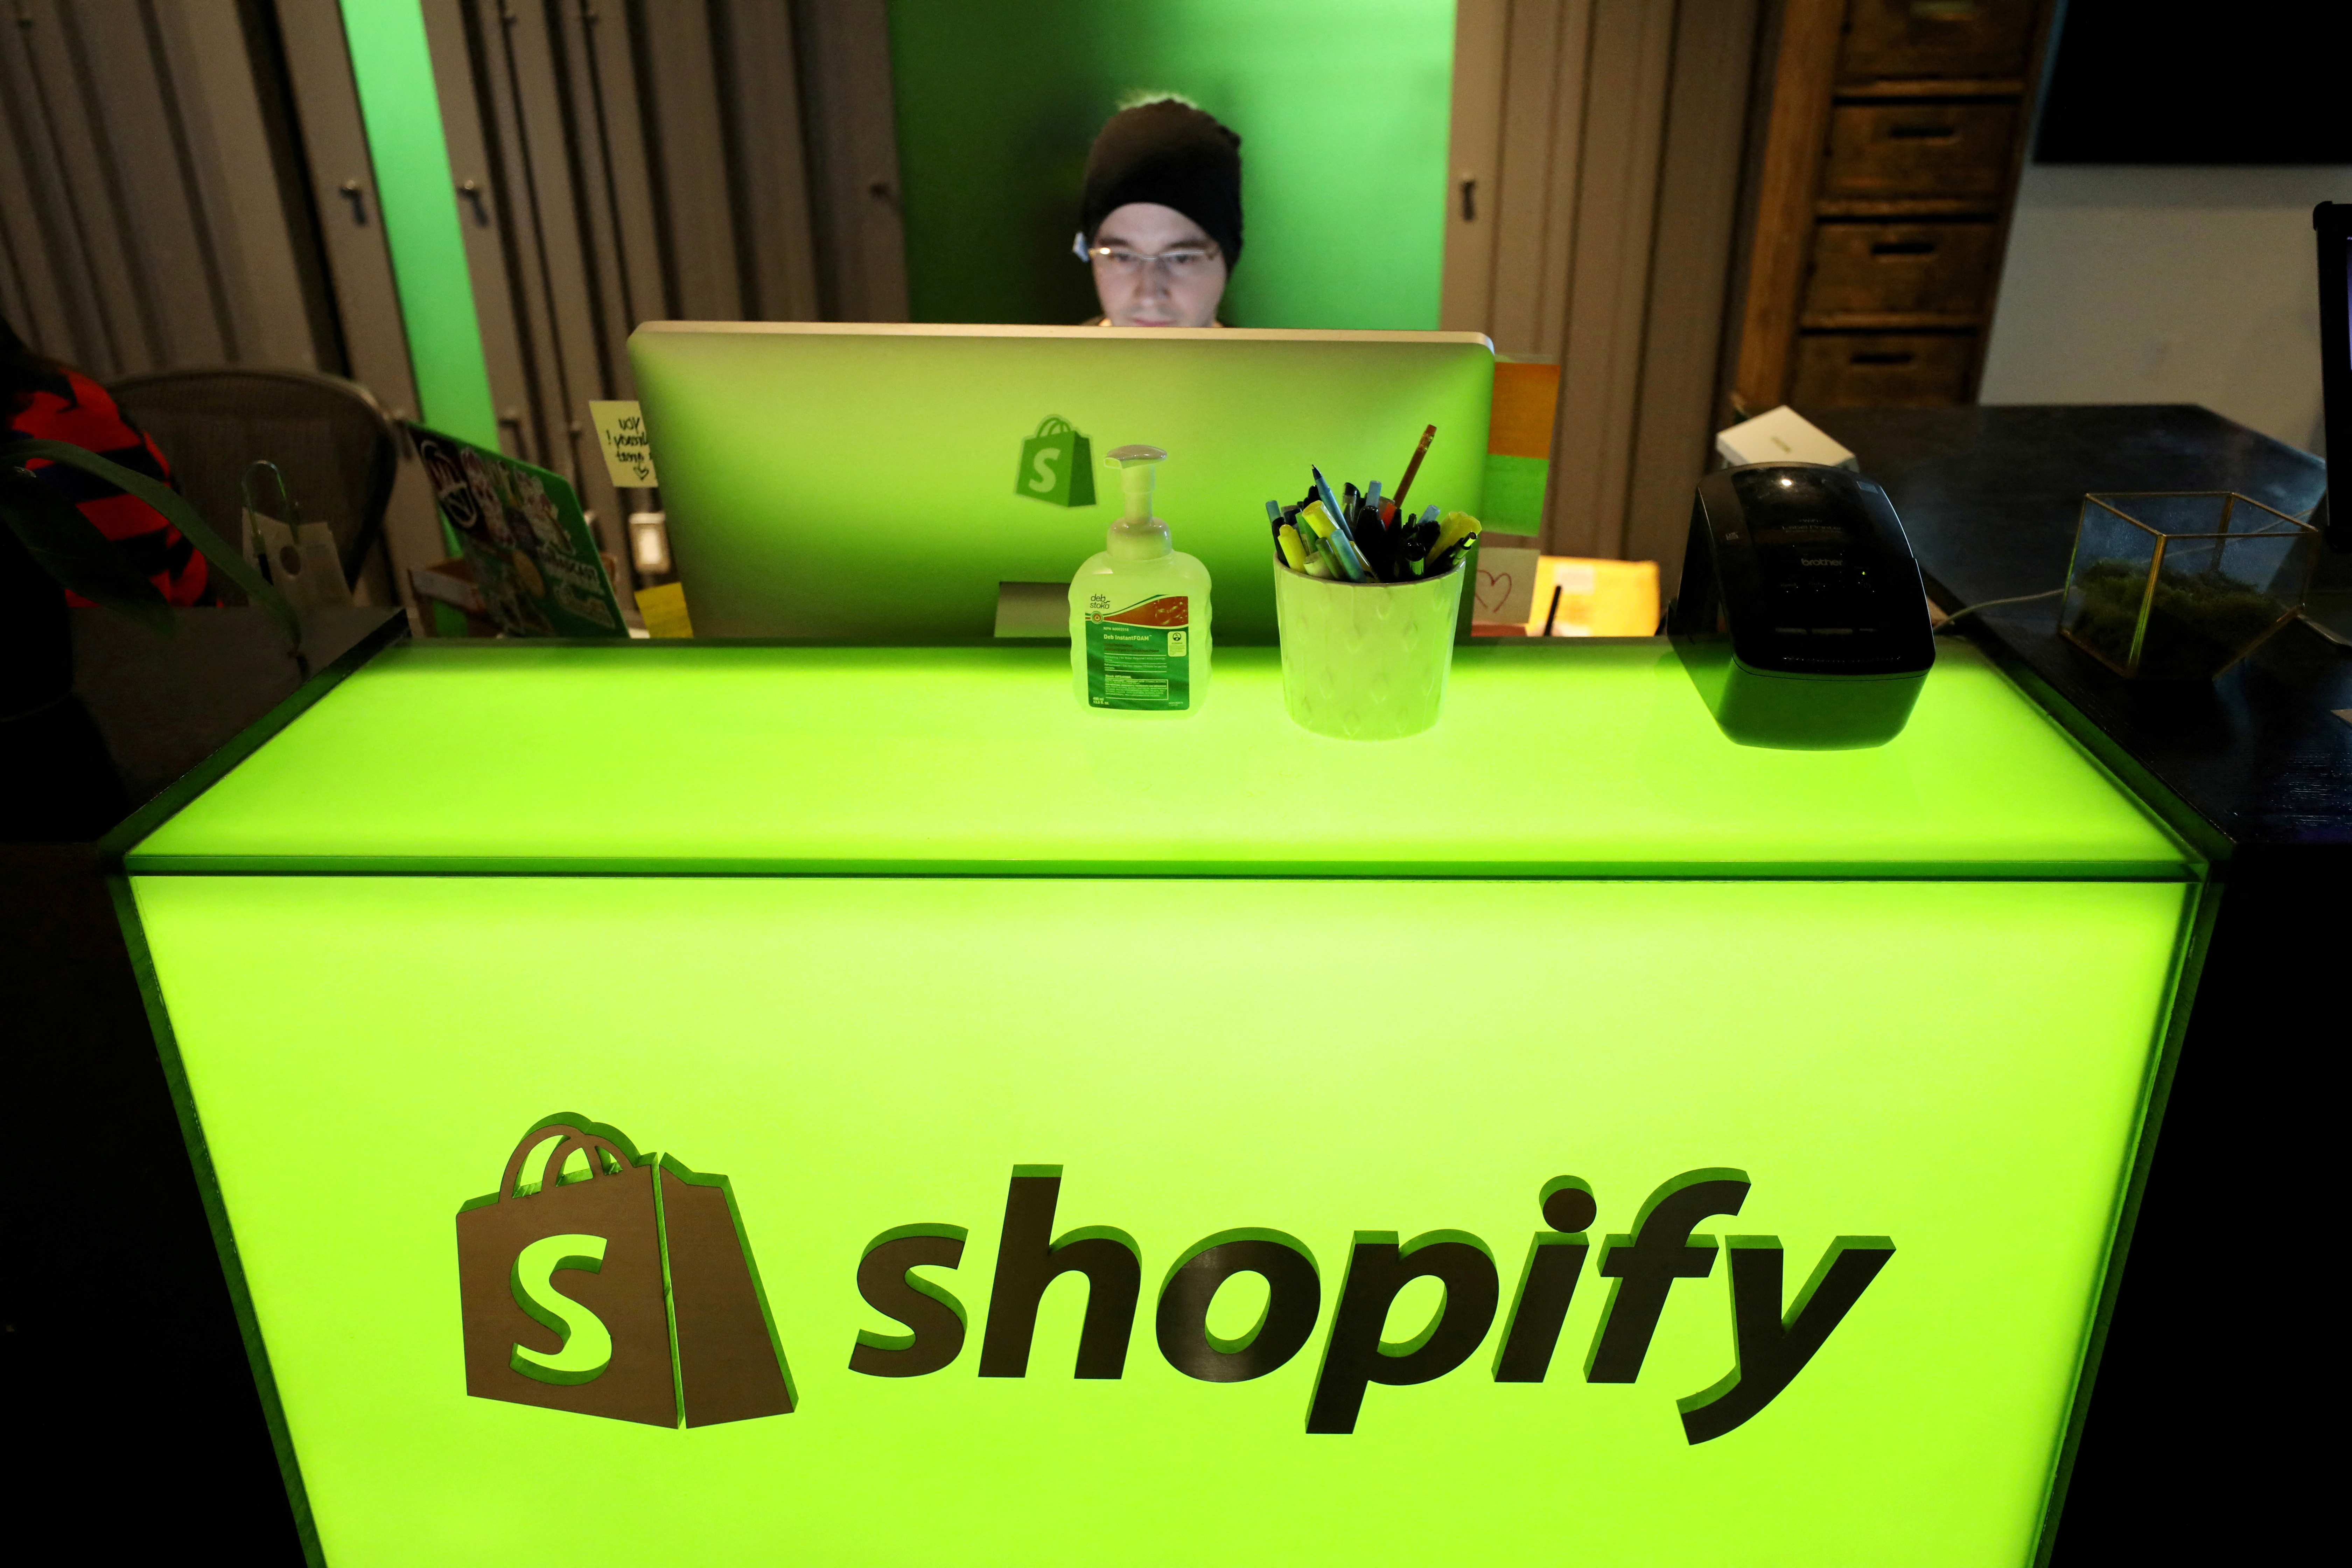 An employee works at Shopify's headquarters in Ottawa